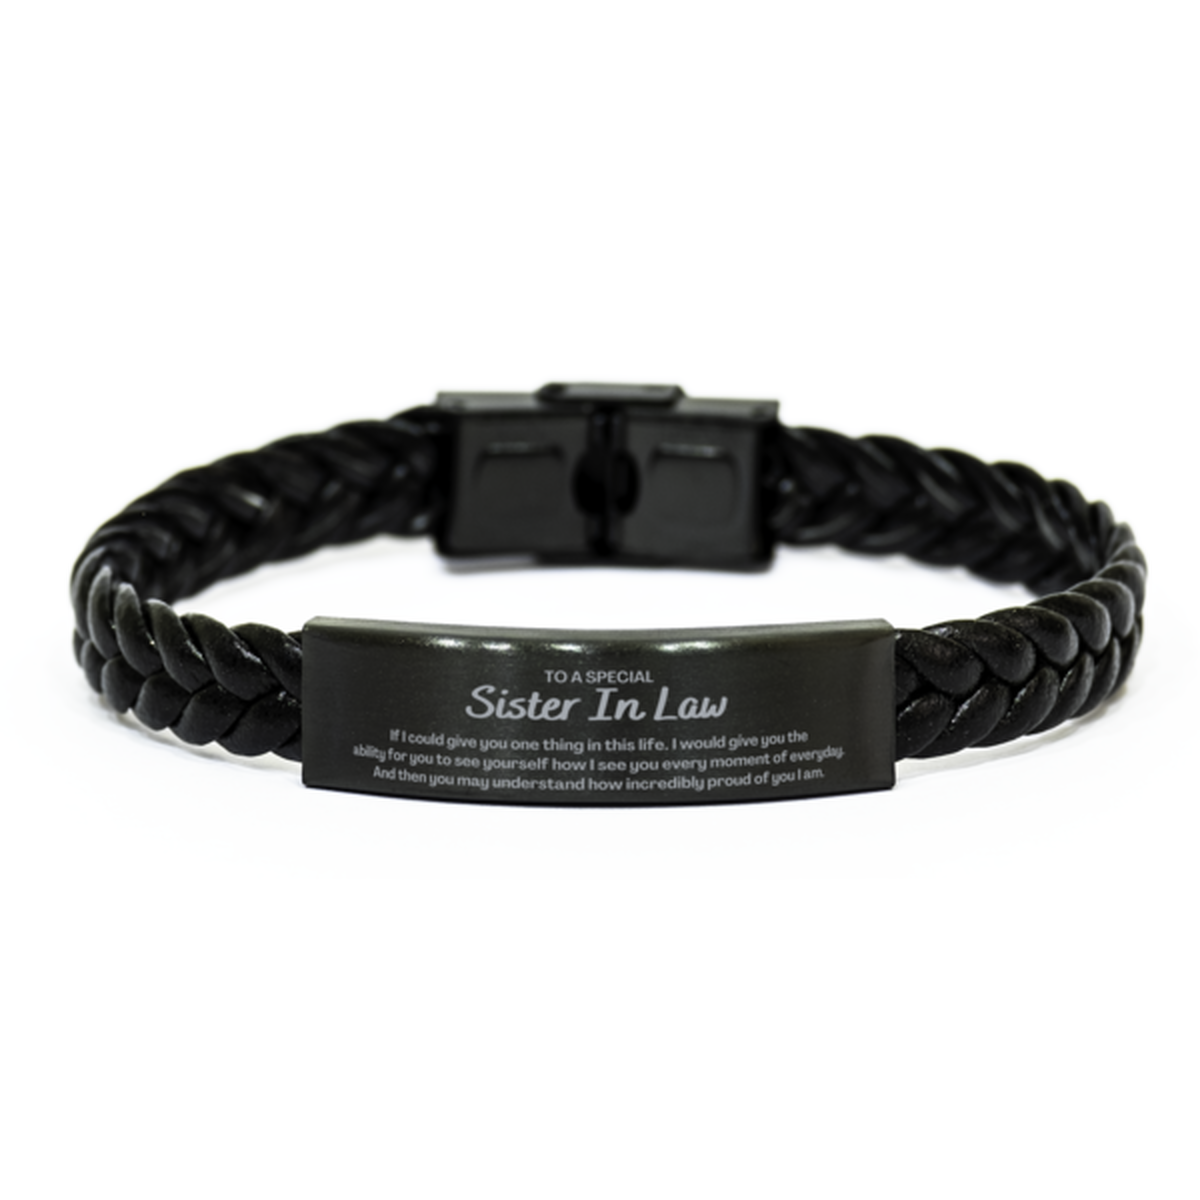 To My Sister In Law Braided Leather Bracelet, Gifts For Sister In Law Engraved, Inspirational Gifts for Christmas Birthday, Epic Gifts for Sister In Law To A Special Sister In Law how incredibly proud of you I am